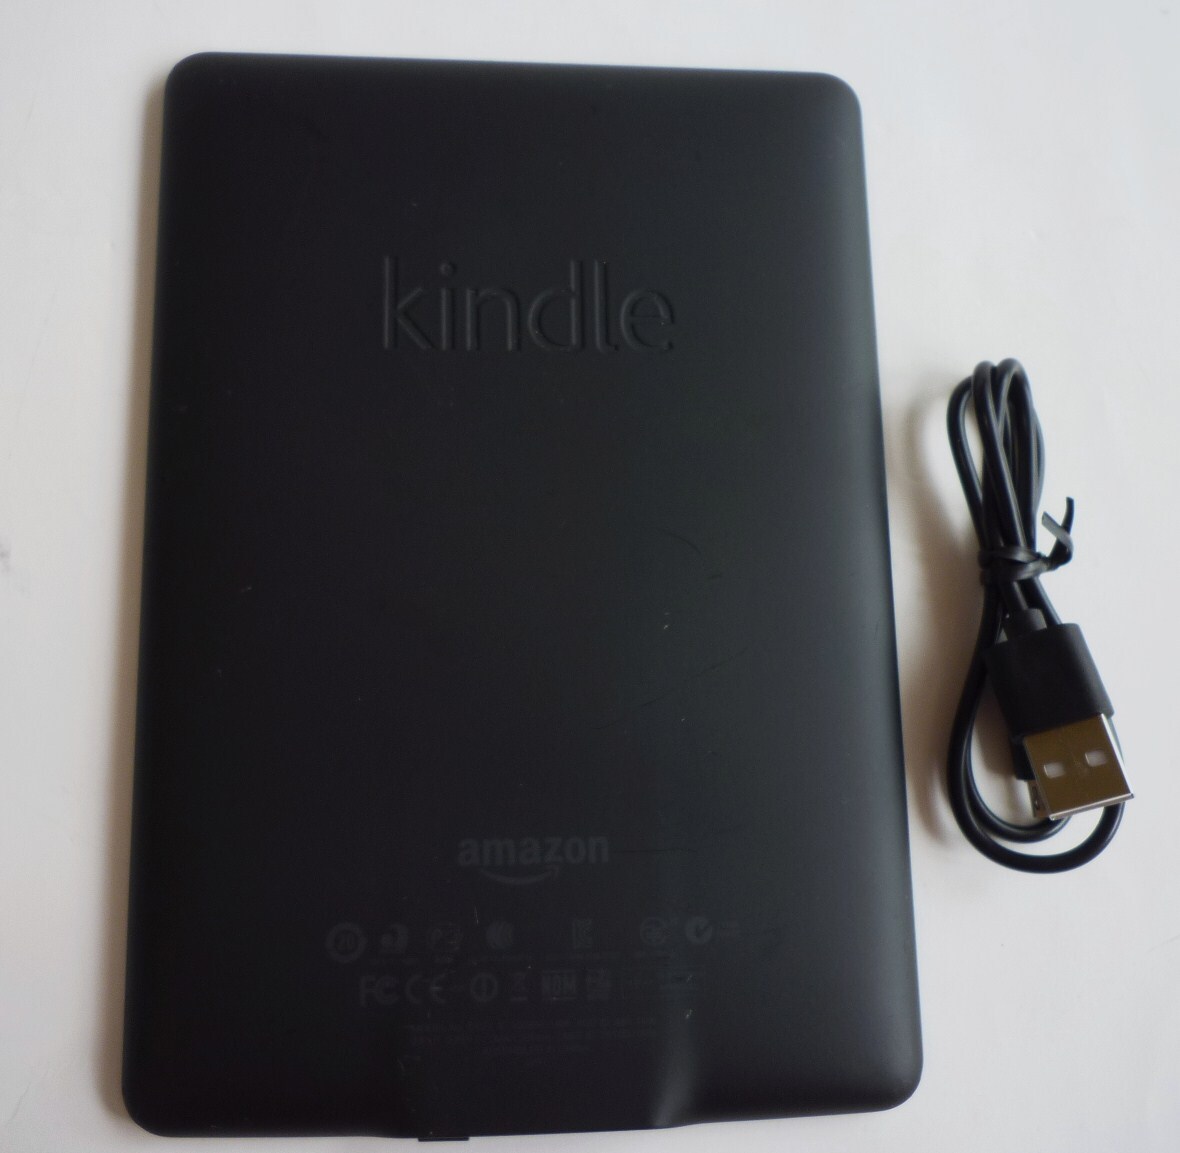  gold dollar Kindle Paperwhite no. 5 generation EY21 Wi-Fi black black Amazon body only the first period . settled 